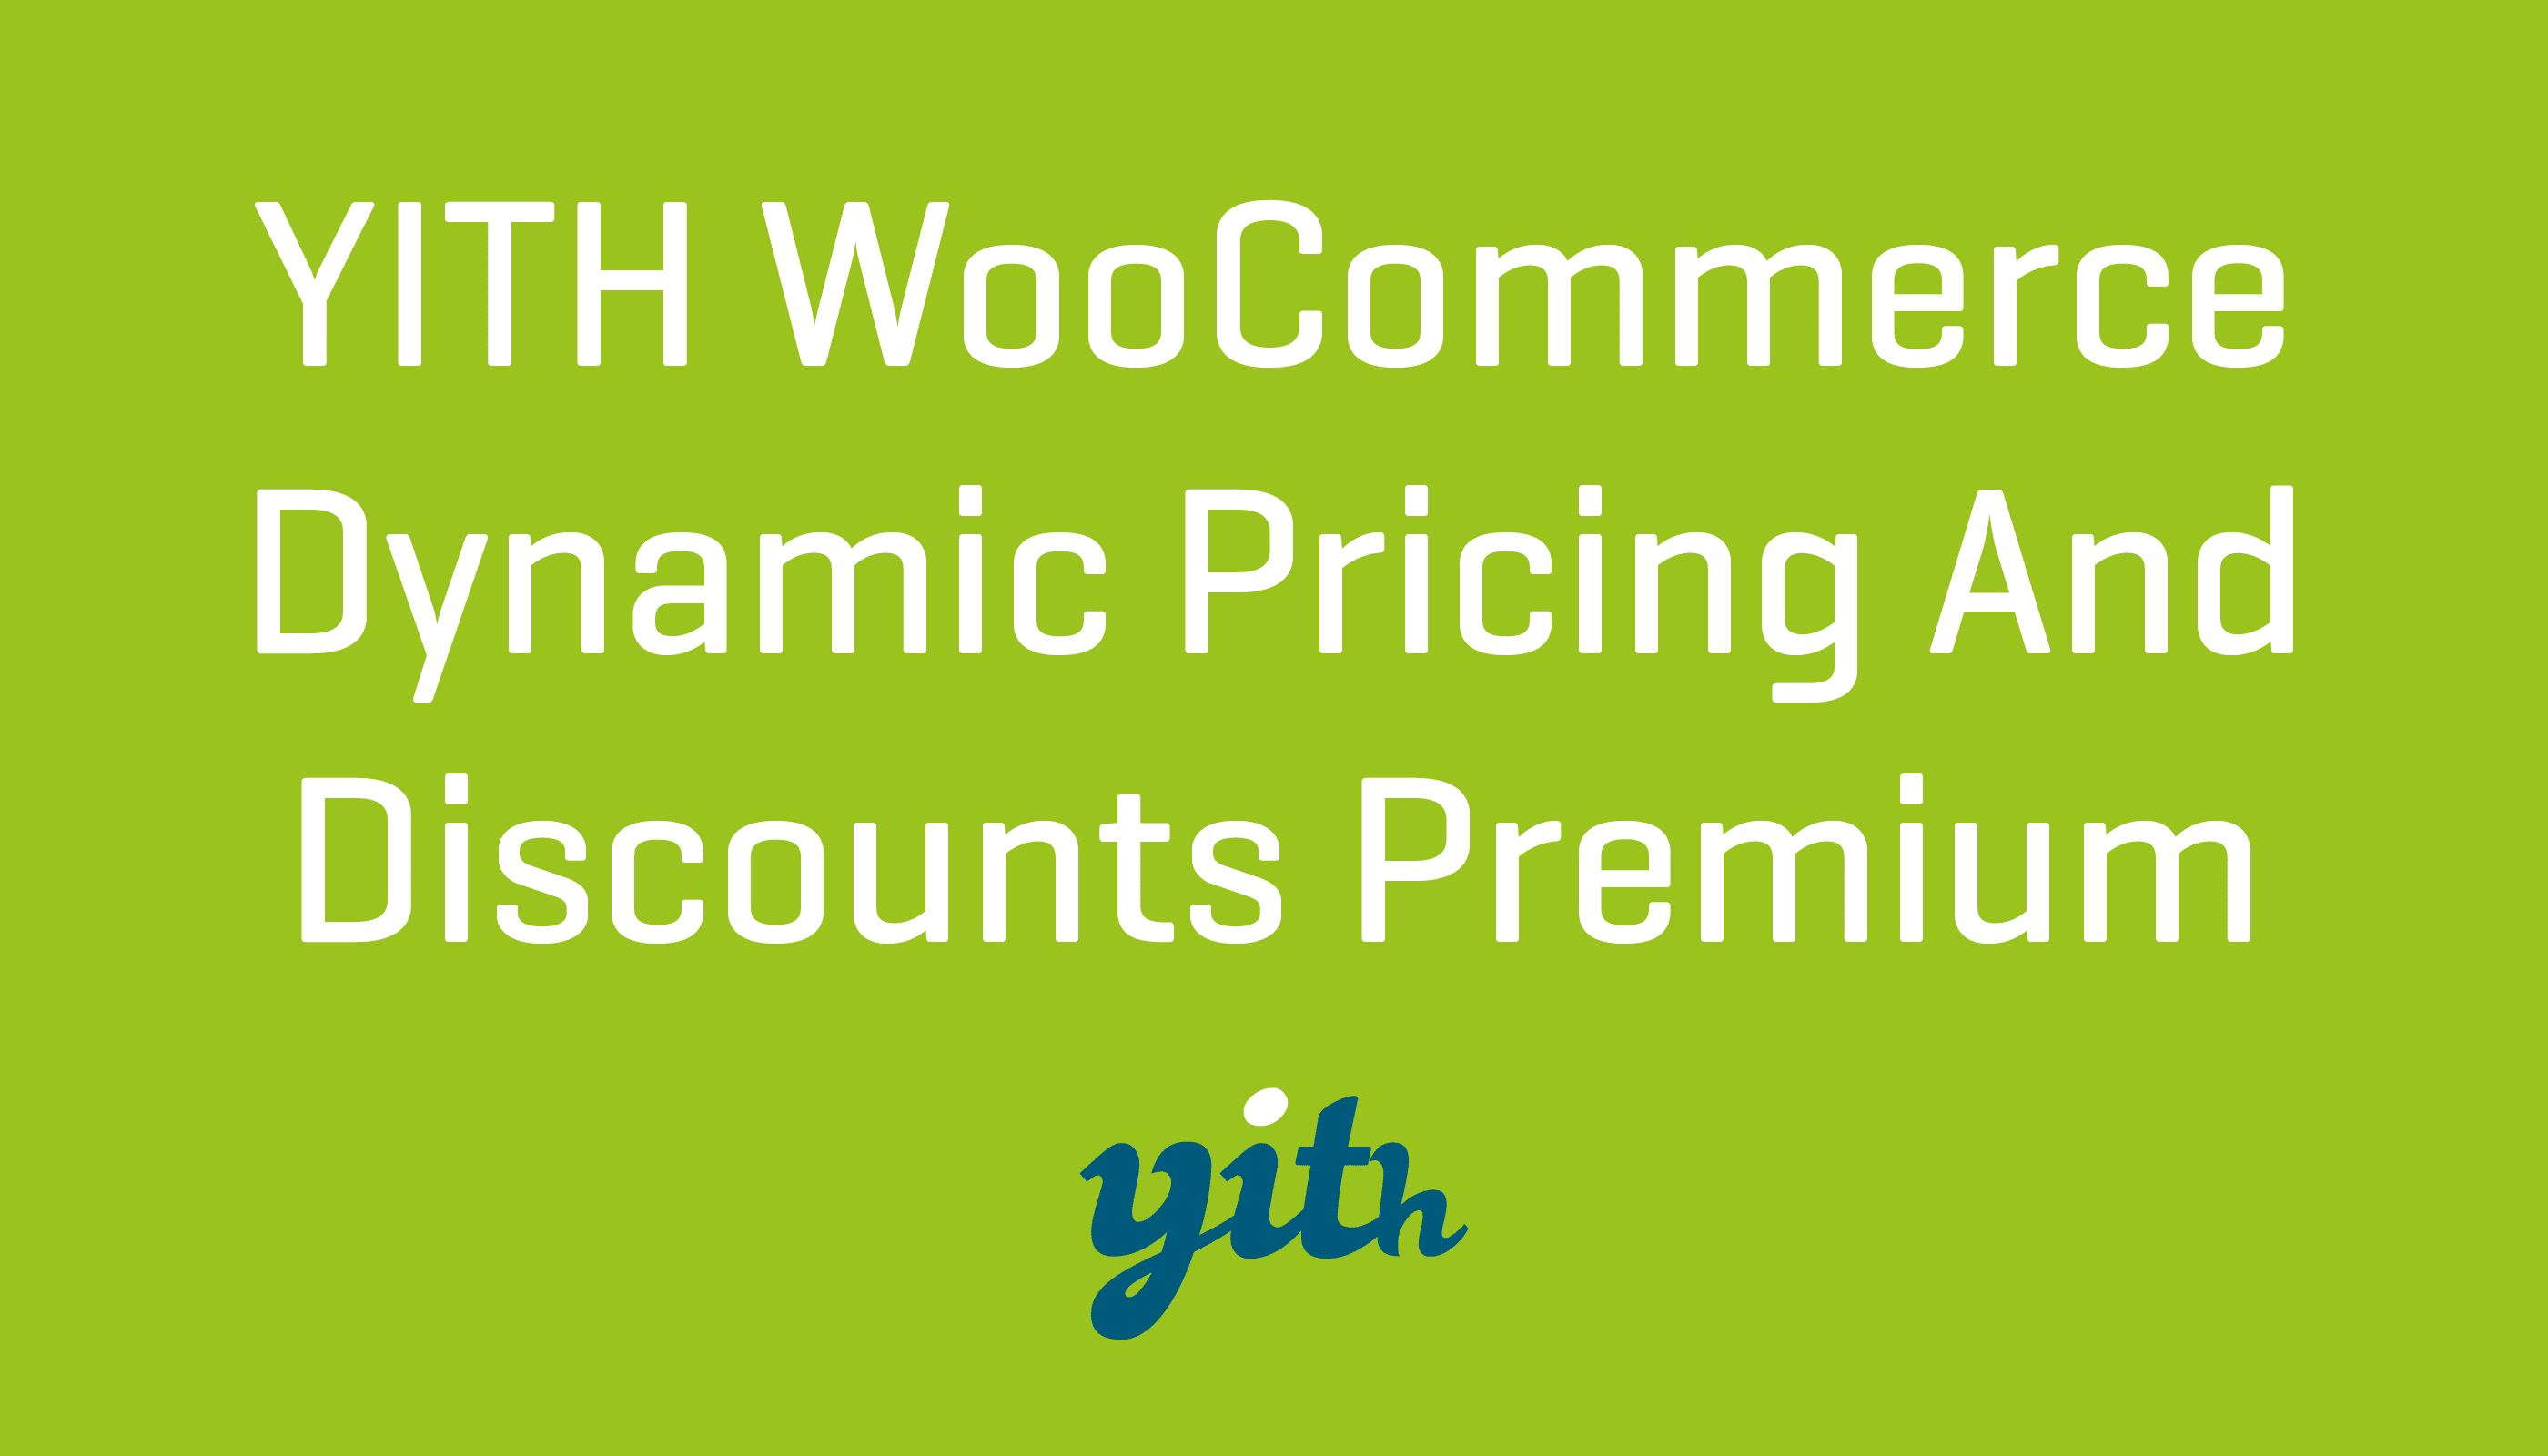 YITH WooCommerce Dynamic Pricing And Discounts Premium